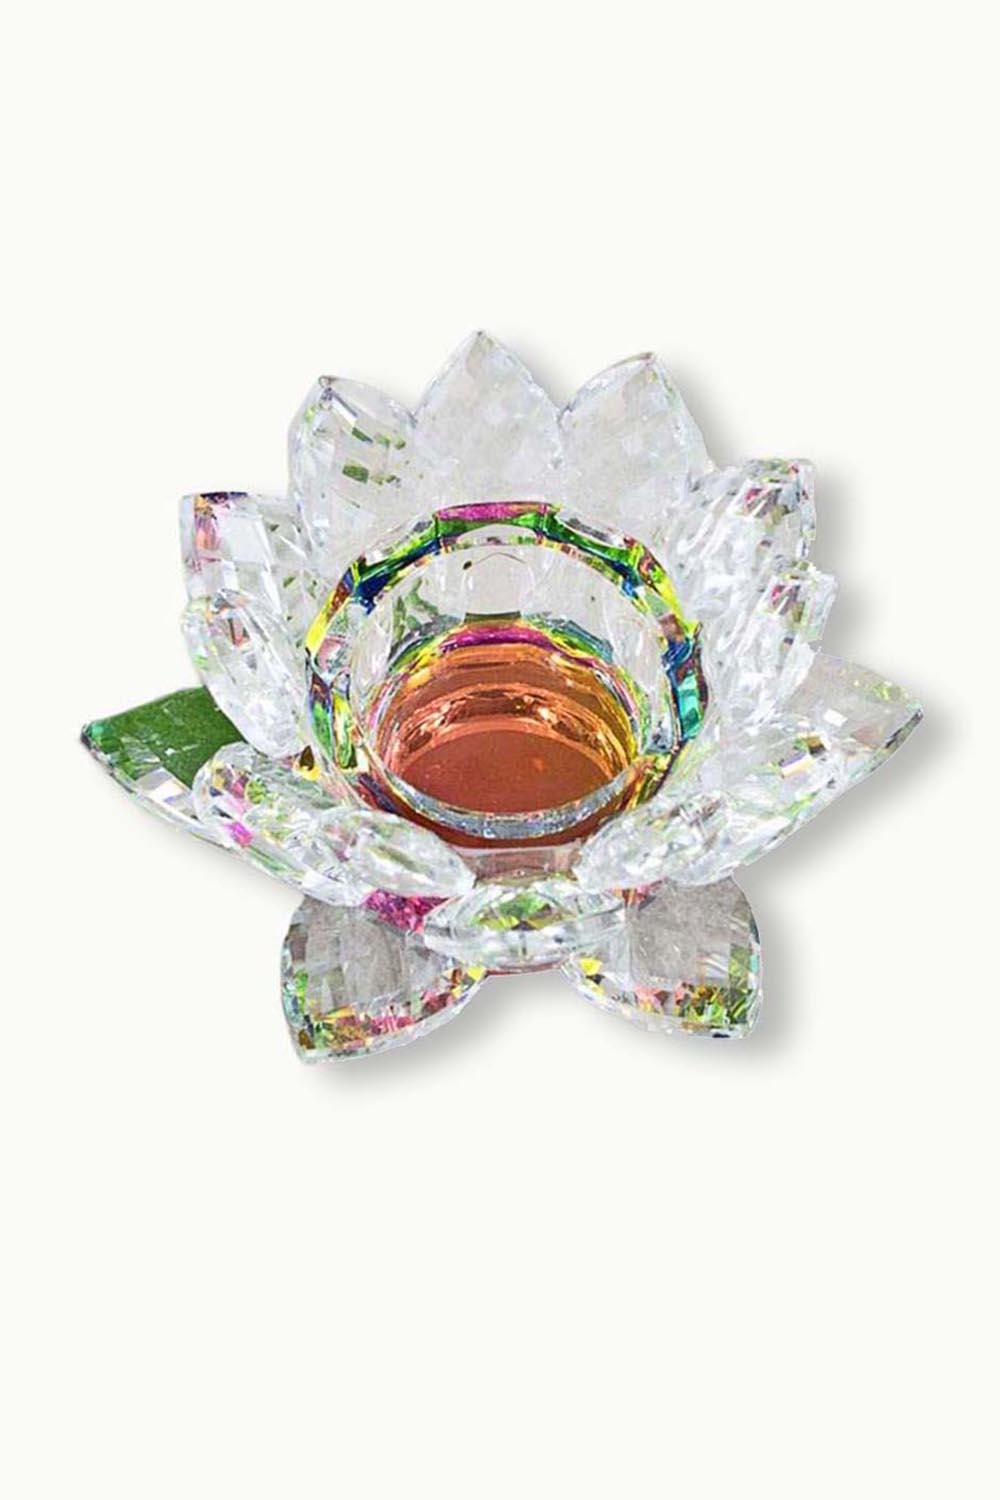 Lotus Crystal Candle Votive